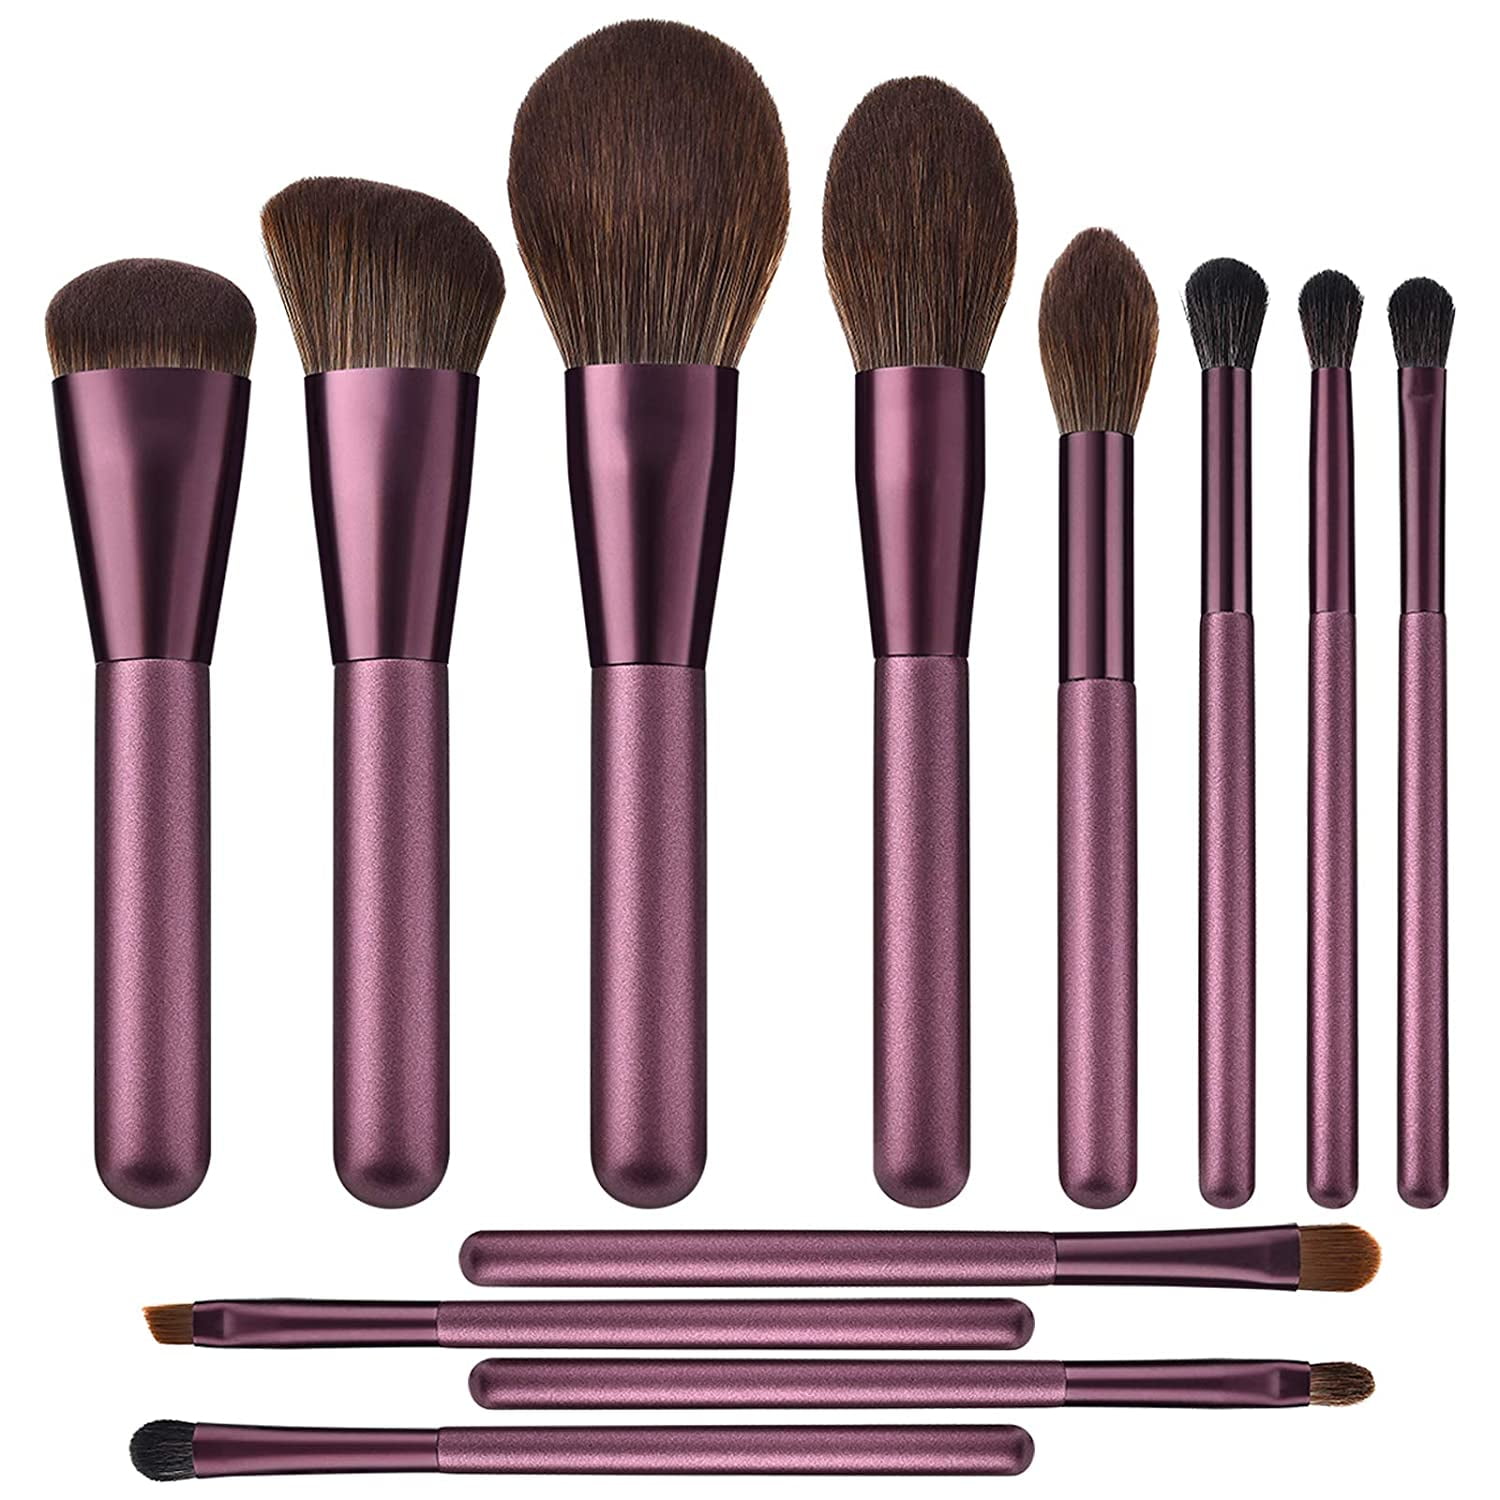 Buy MAKE UP FOR EVER Blender Brush- Large #242 here at 70% discount!  Branded makeup brushes at outlet prices. Worldwide shipping in 7 working  days! – Pony Brushes